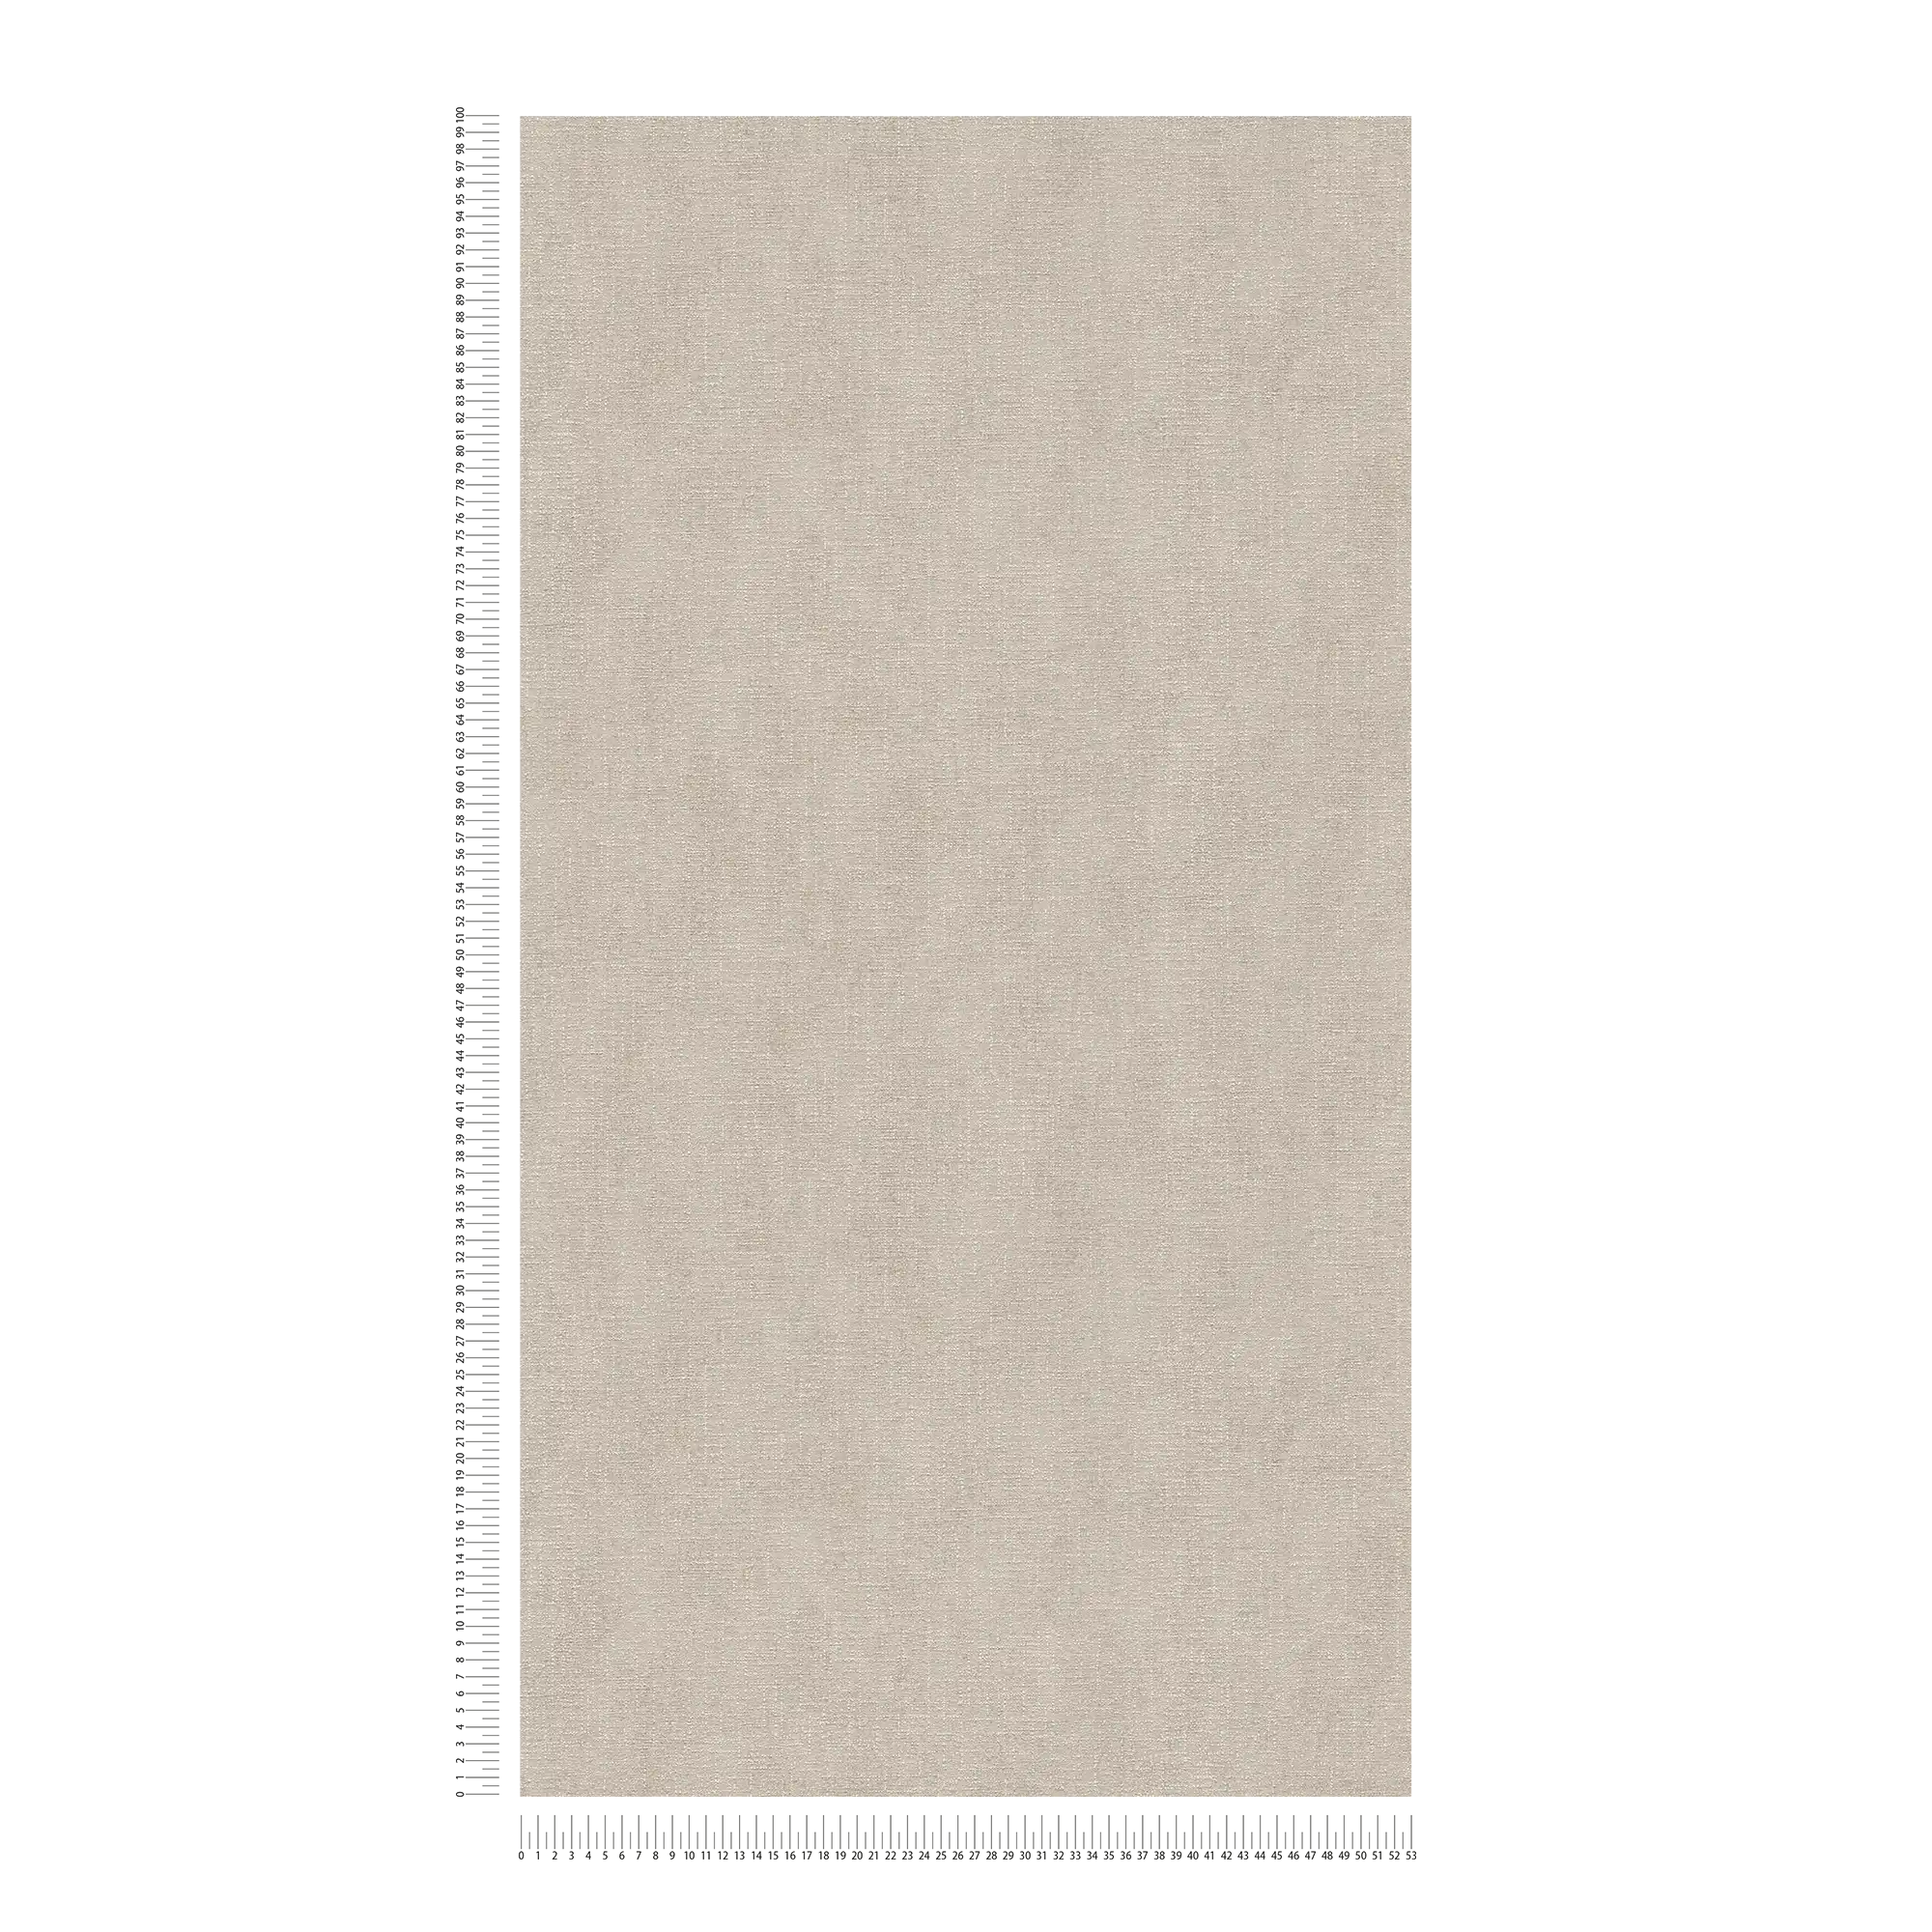             Light grey non-woven wallpaper with shimmer finish and textured pattern - grey
        